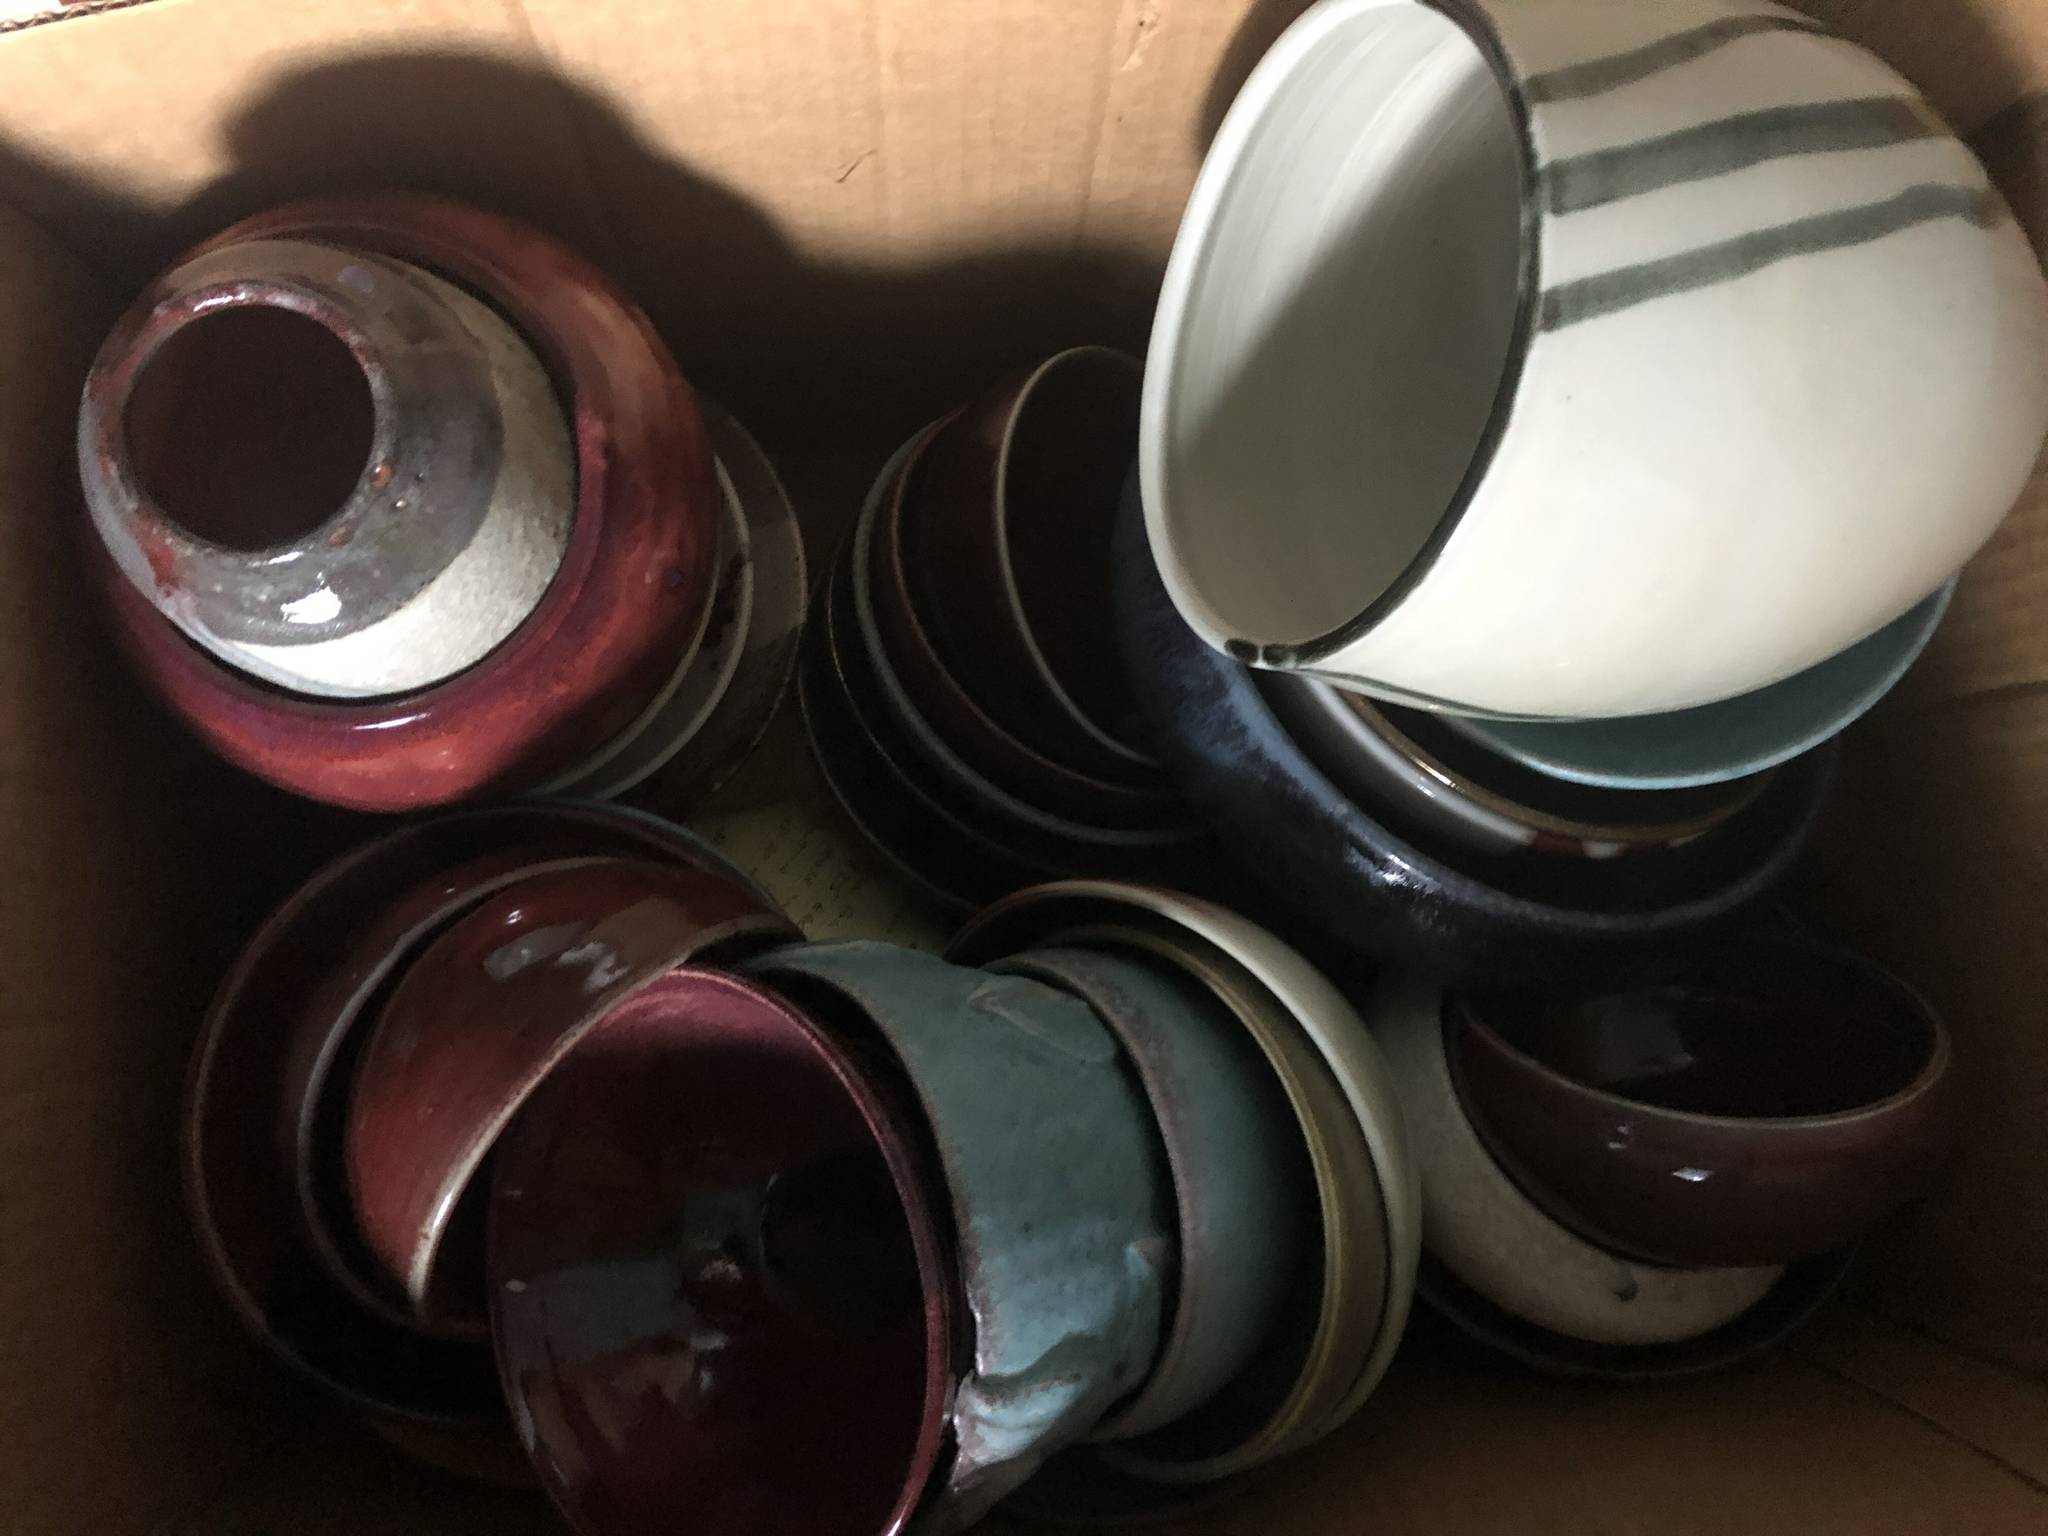 Bowls like those seen here will be available for sale or auction during the Glory Hall’s Empty Bowls fundraiser beginning Friday, April 30, 2021. (Courtesy photo / Mariya Lovishchuk)